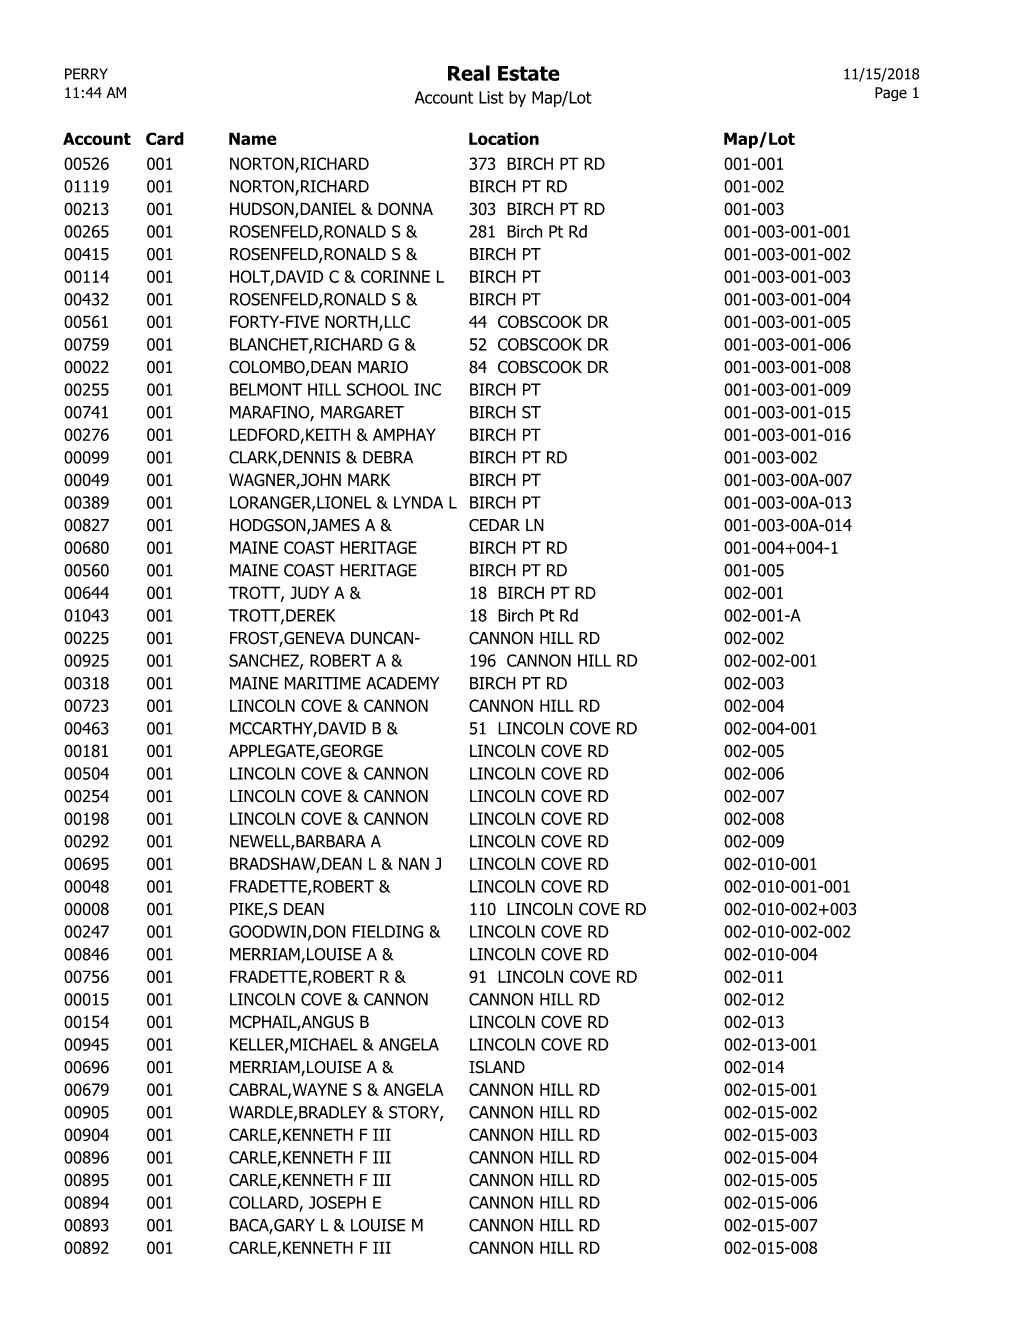 Real Estate 11/15/2018 11:44 AM Account List by Map/Lot Page 1